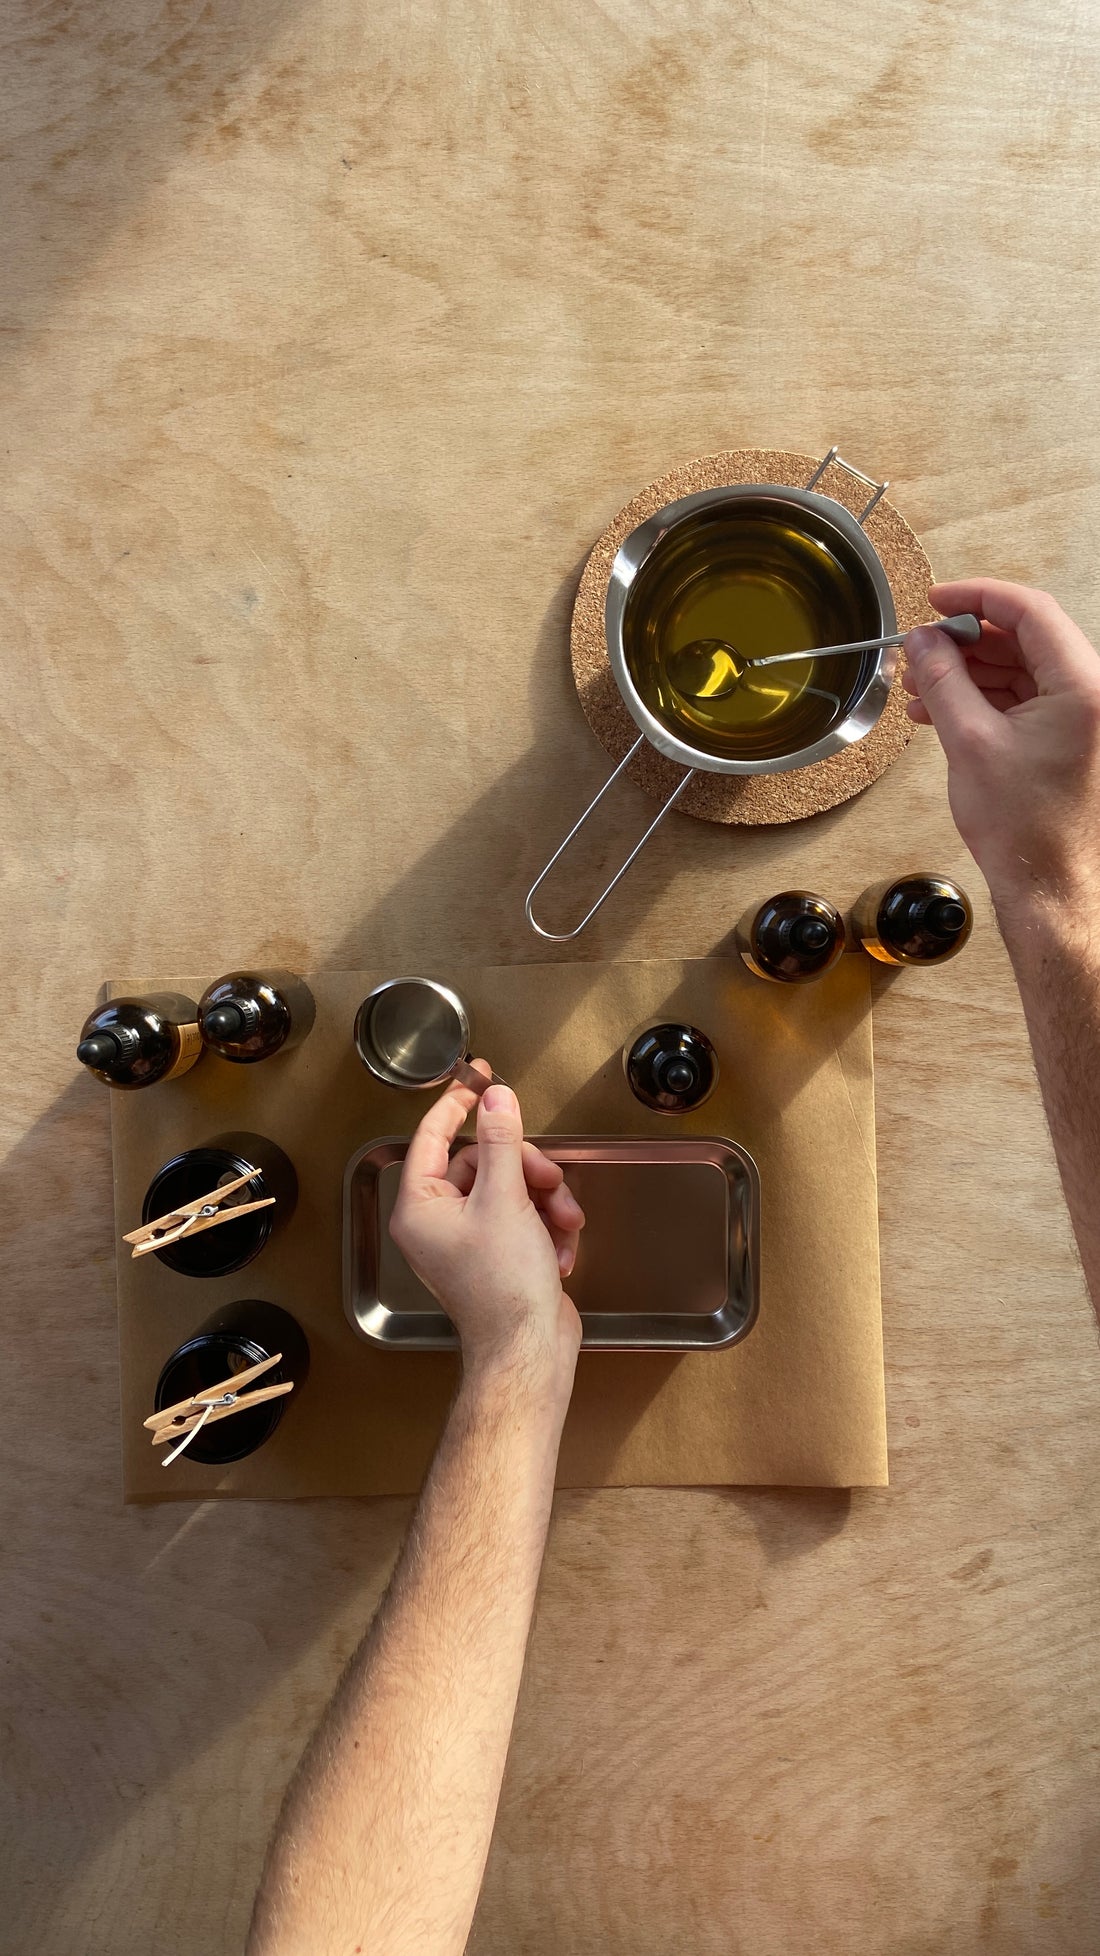 Unleash Your Creativity with Our Candle Making Workshop in East London 16th May 2023!